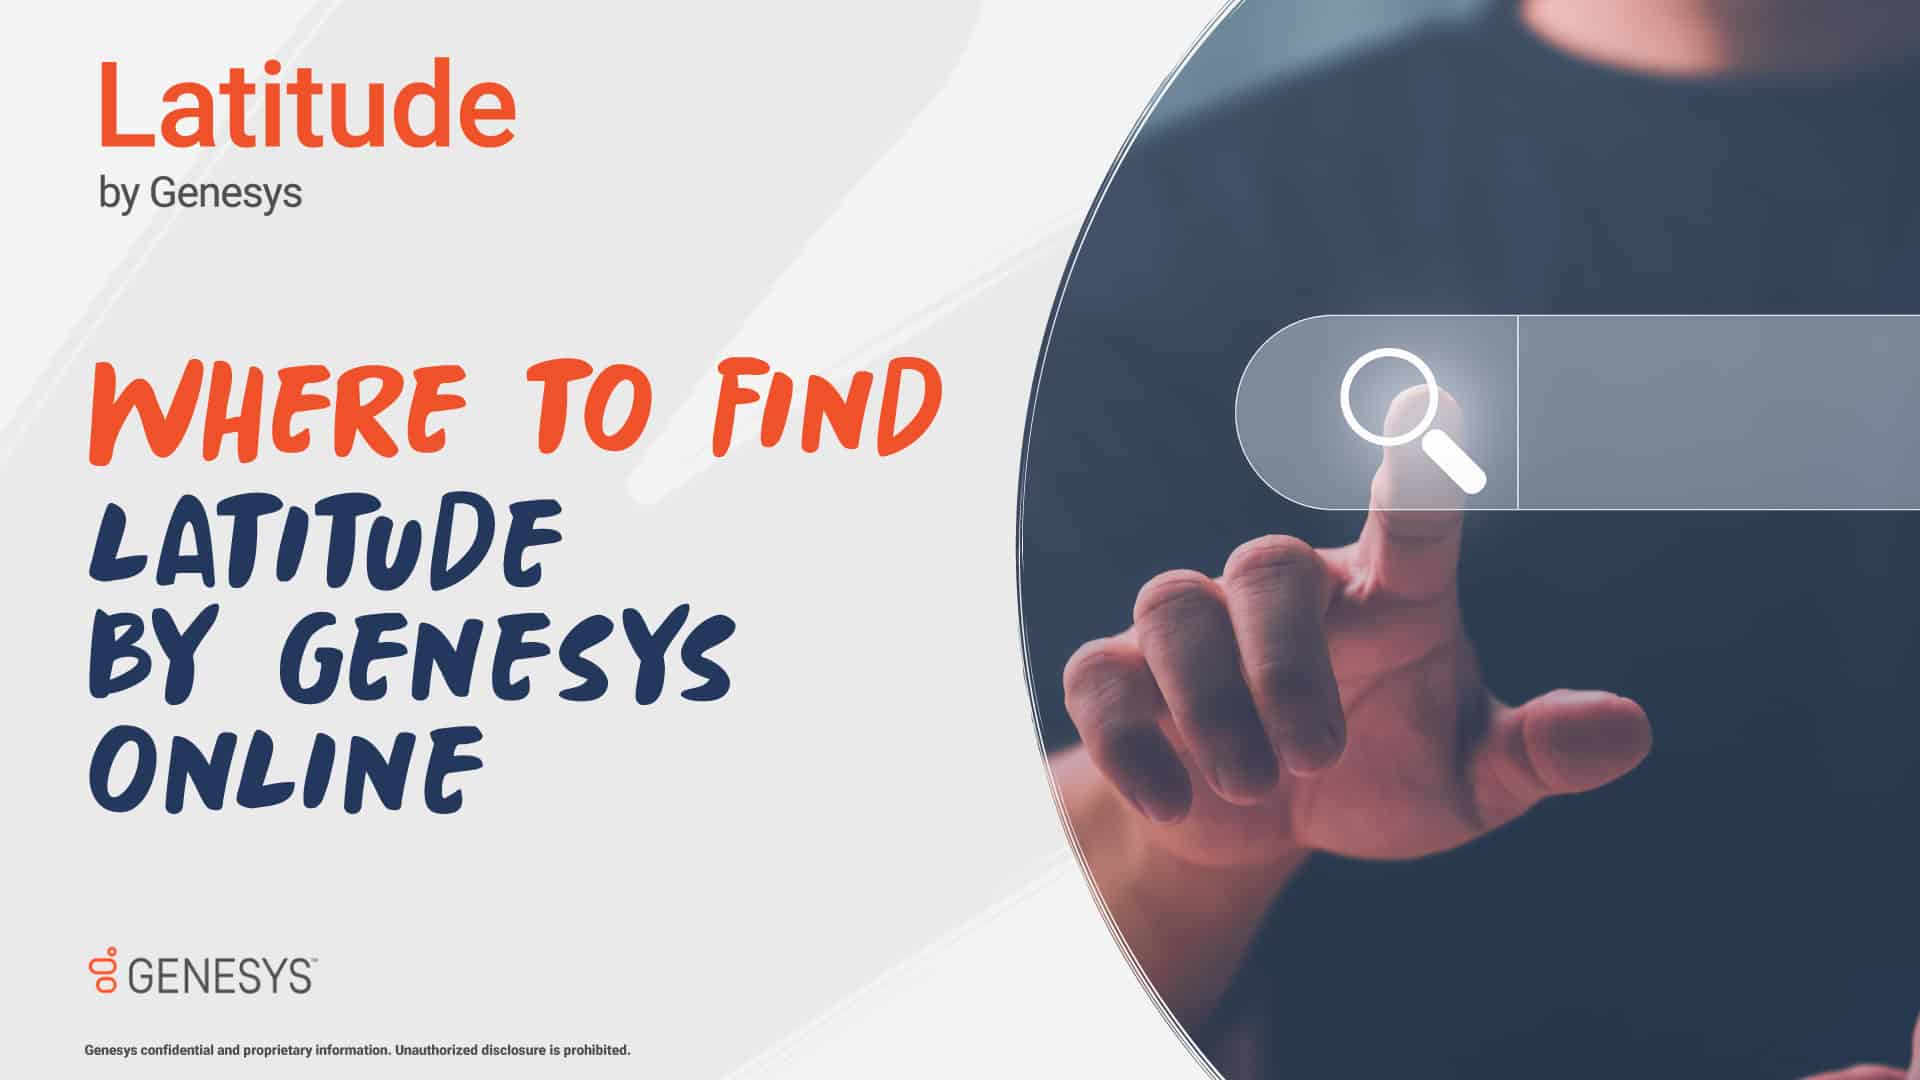 Where to Find Latitude by Genesys Online